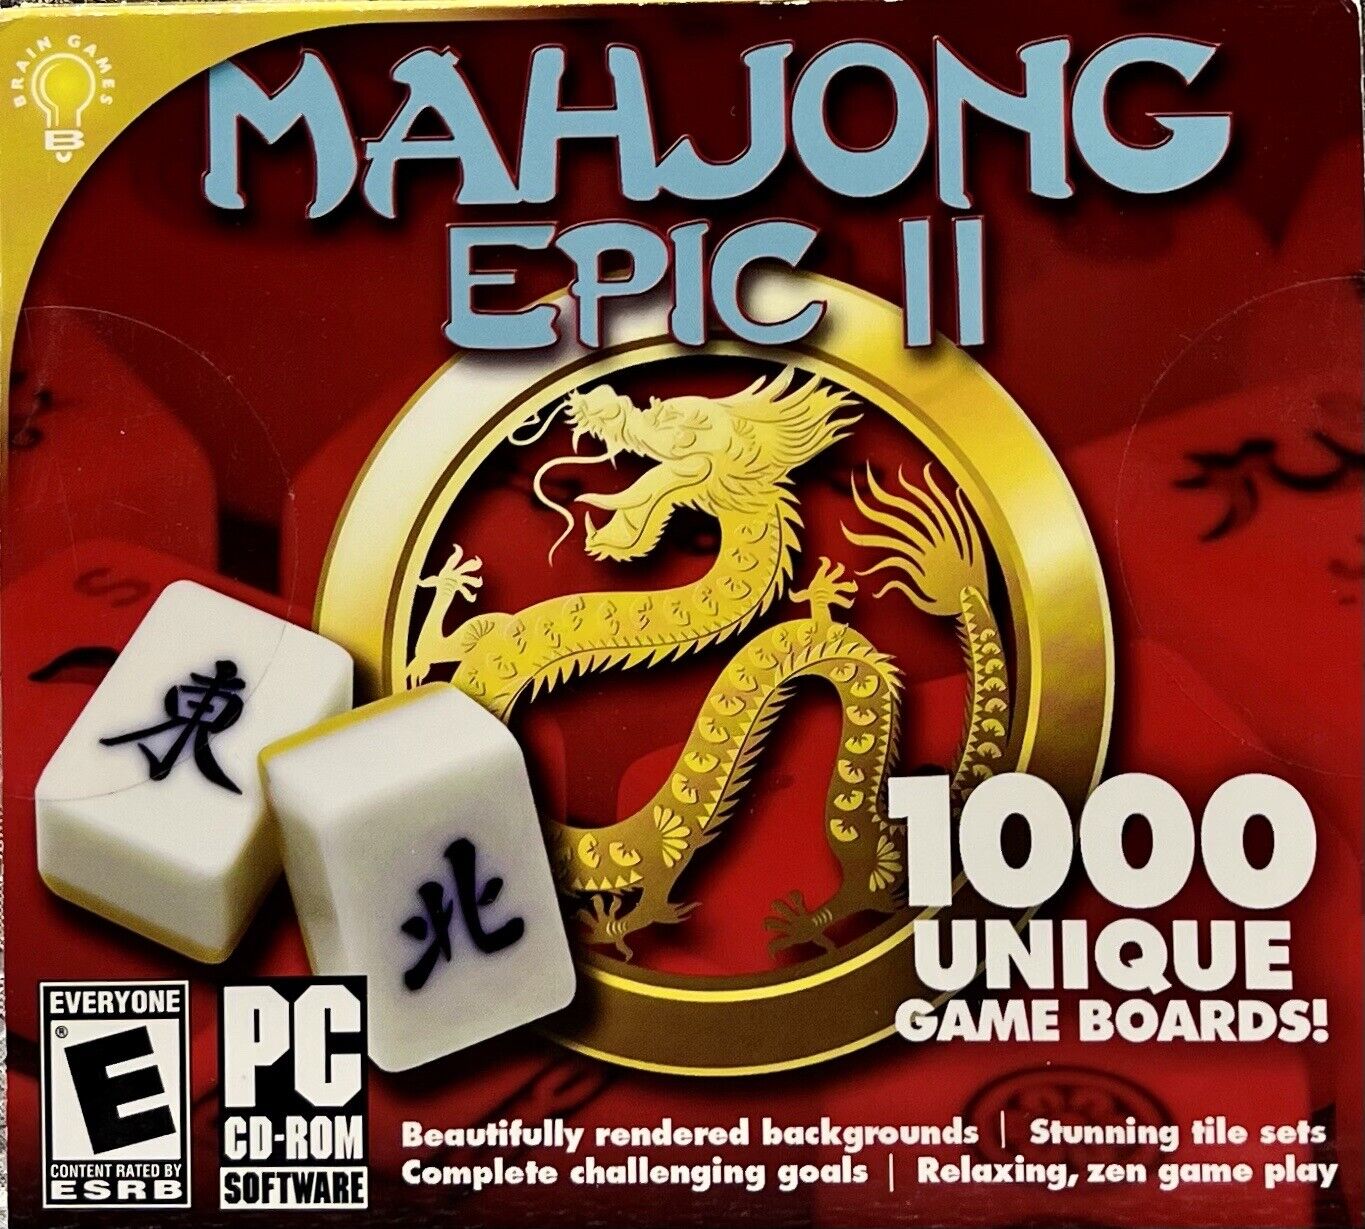 Mahjon Epic II: 1000 Unique Game Boards - PC CD-ROM Software Game (Rated E)